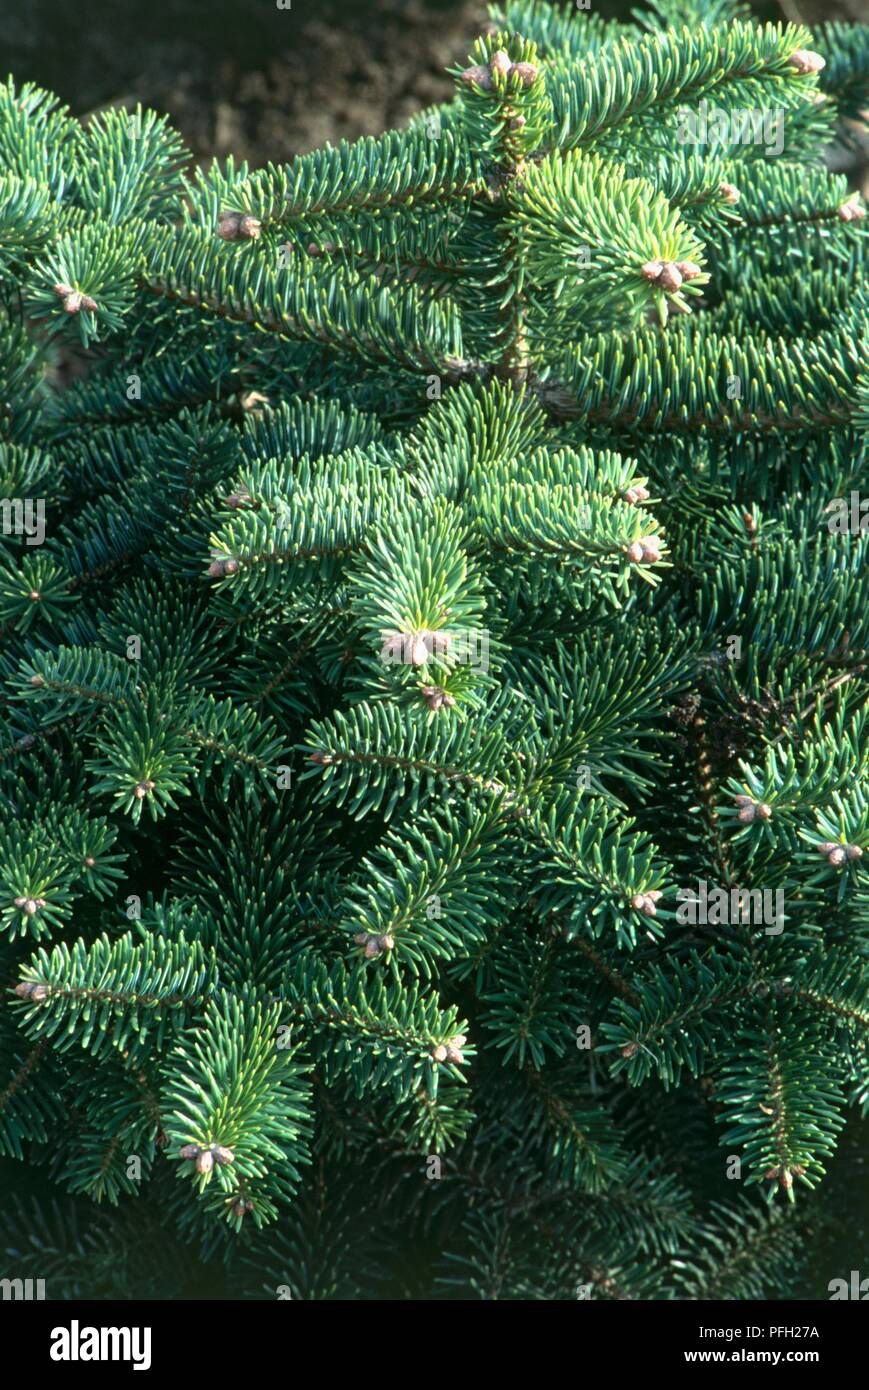 Abies Cephalonica 'Meyers Dwarf', needle leaves on branches of coniferous tree Stock Photo